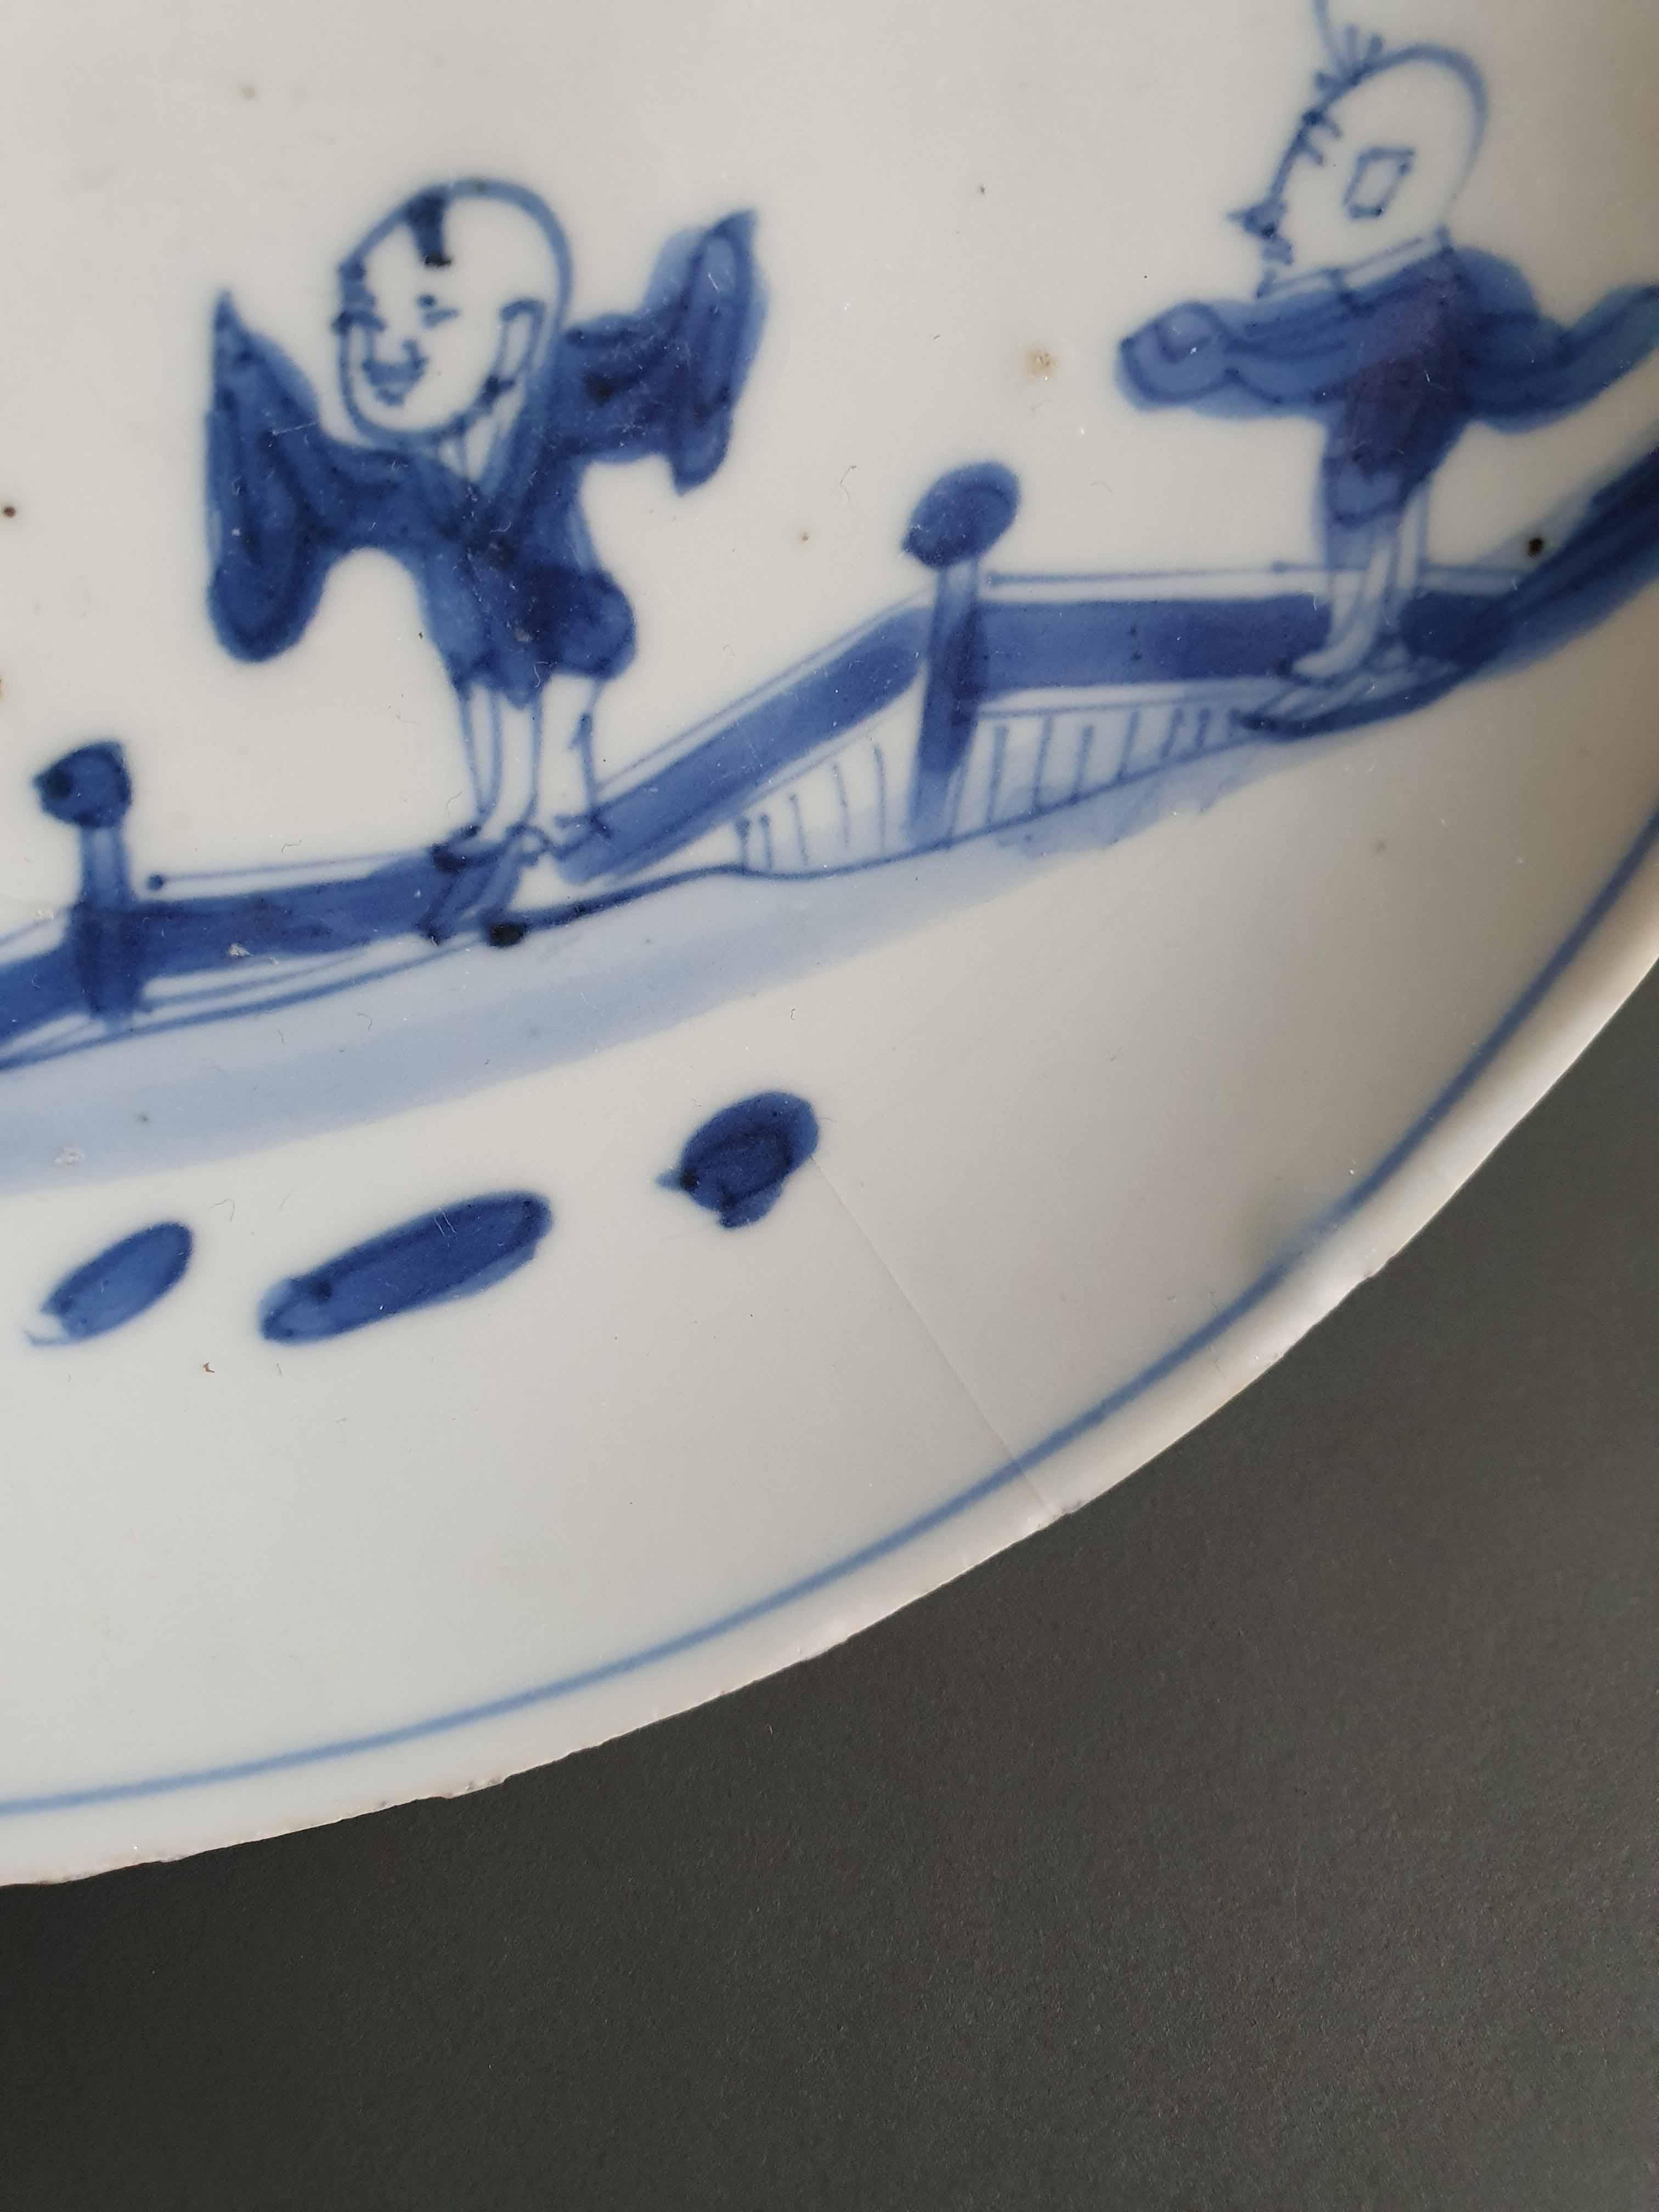 A very nicely decorated plate. Late Ming.

Additional information:
Material: Porcelain & Pottery
Region of Origin: China
Period: 17th century Transitional (1620 - 1661)
Age: Pre-1800
Condition: 2 line and rimfritting/mushikui.
Dimension: Ø 14.6 x 3